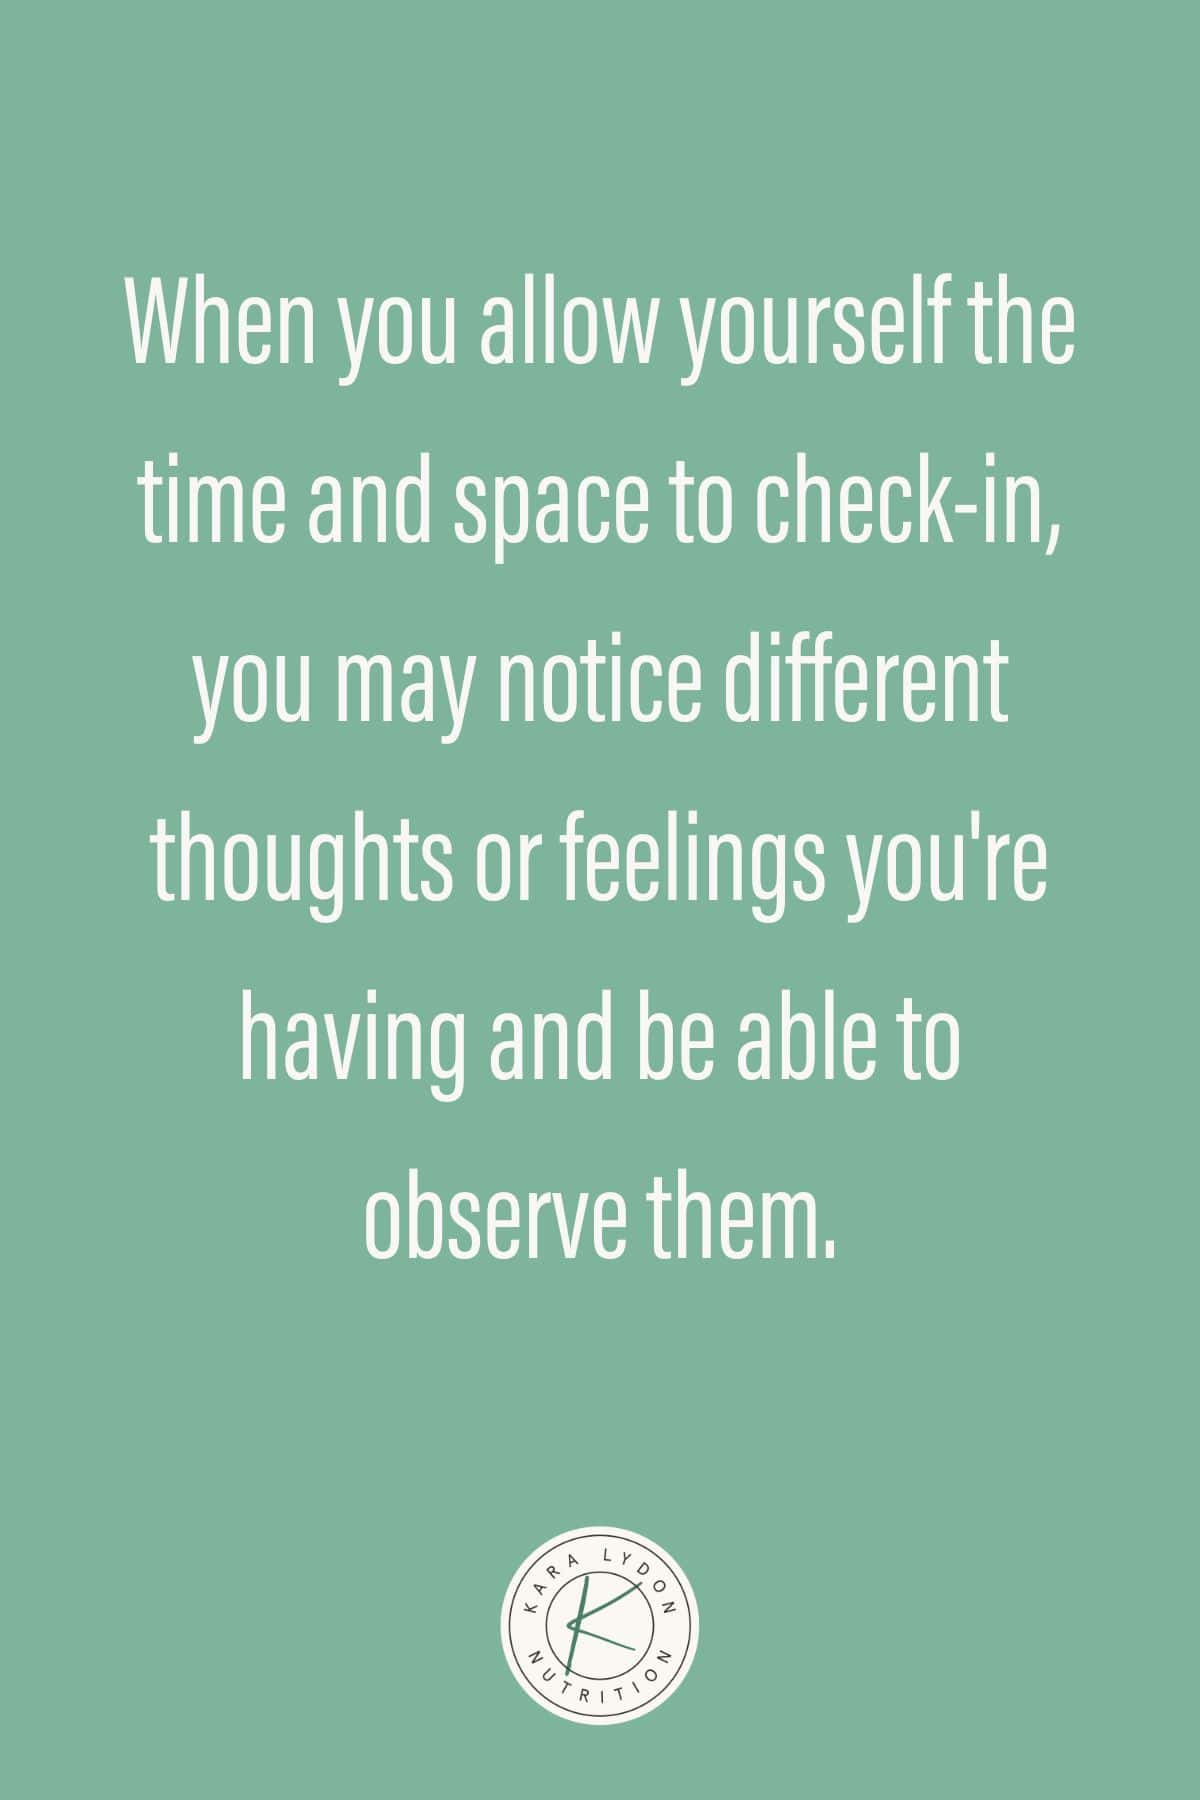 graphic with quote: "When you allow yourself the time and space to check in, you may notice different thoughts or feelings you have and be able to notice them."